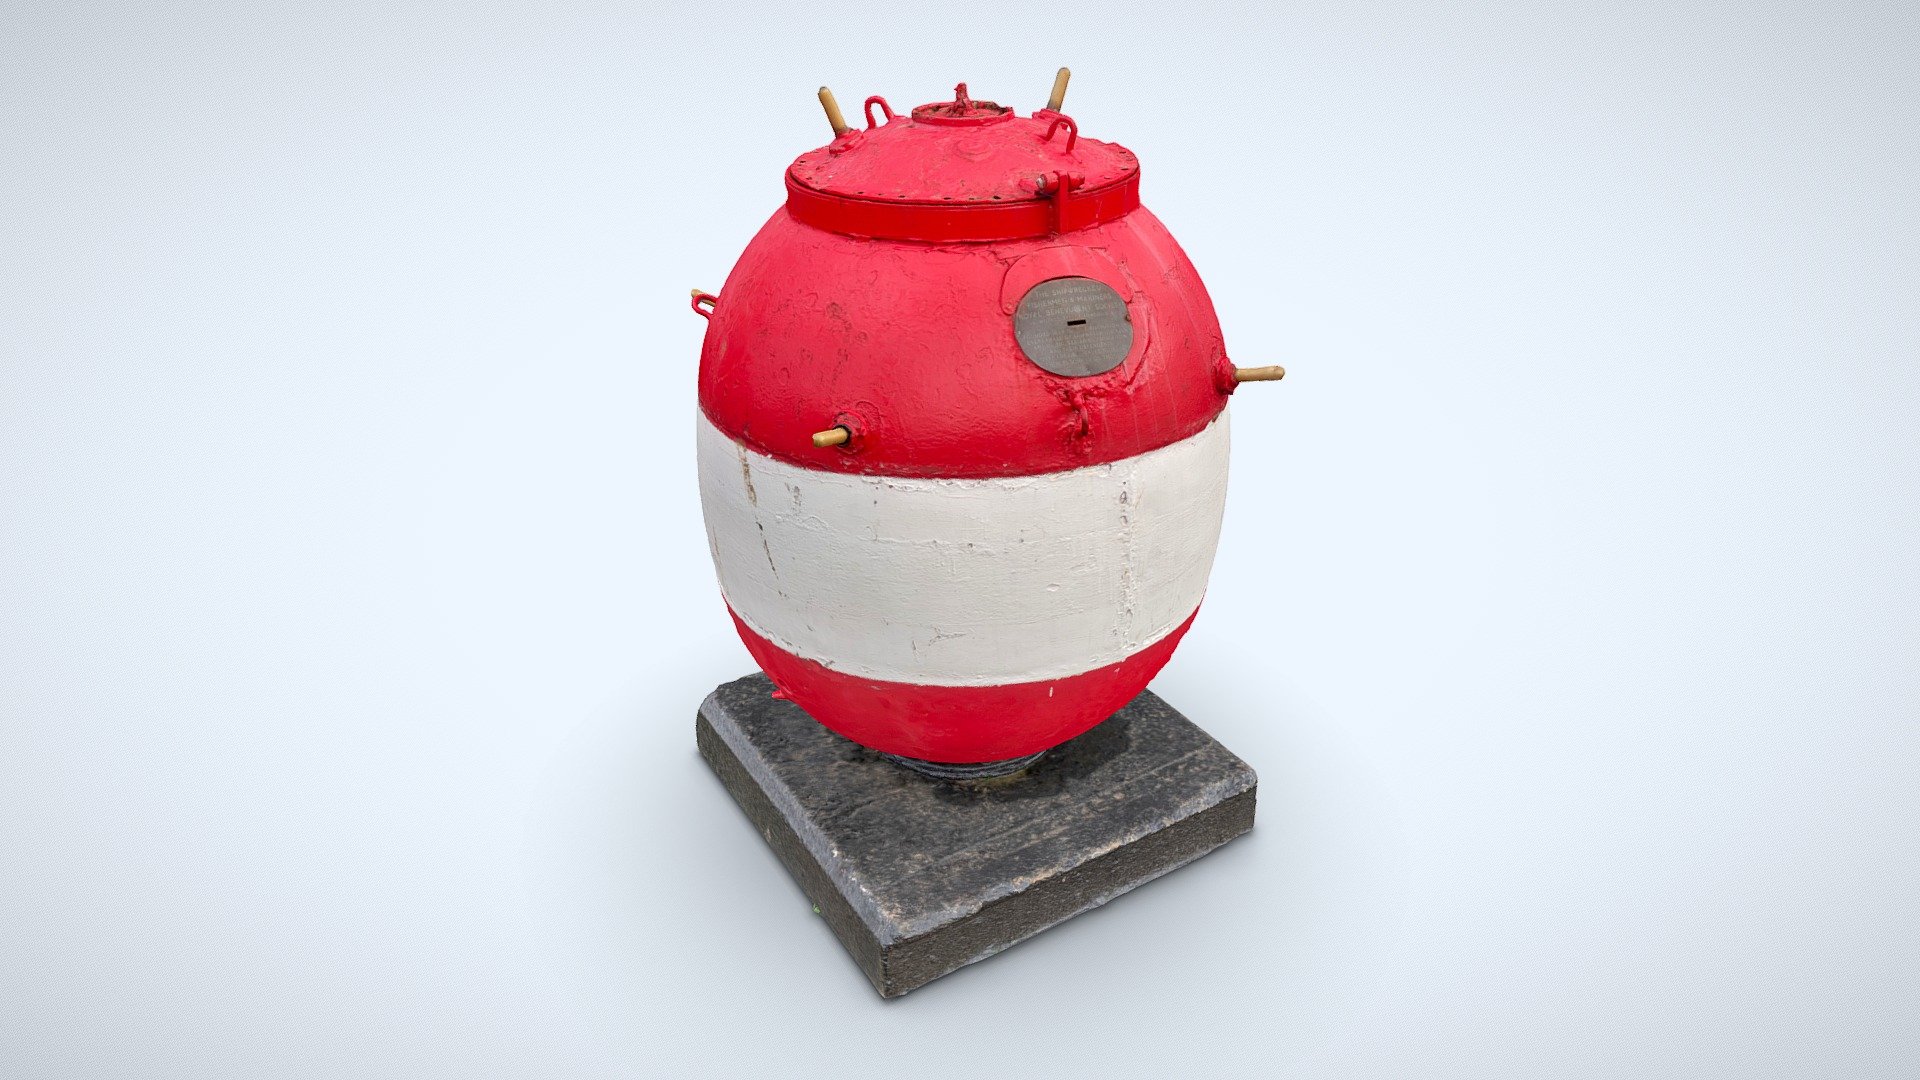 An old sea mine, sat near West Pier at Scarborough harbour, North Yorkshire. Now painted and repurposed as a charity collection box. I'm not going to bother trying to identify it, I spend ages trying to ID the last one and couldn't be sure of it (https://skfb.ly/6RsLI). This mine does have &lsquo;Hertz' horns, designed to detonate the main charge on contact, as opposed to the magnetic detonation design of the last one. Mines that looked a lot like this were ubiquitous in naval warfare around Great Britain in both World Wars, and indeed may remain a danger to shipping today when they turn up. 

166 images shot in November 2022. Processed in Metashape.

Stunning location next to a bin and some lobster pots.
 - Sea Mine | Scarborough Harbour - 3D model by Nick Mason Archaeology (@nickmason) 3d model